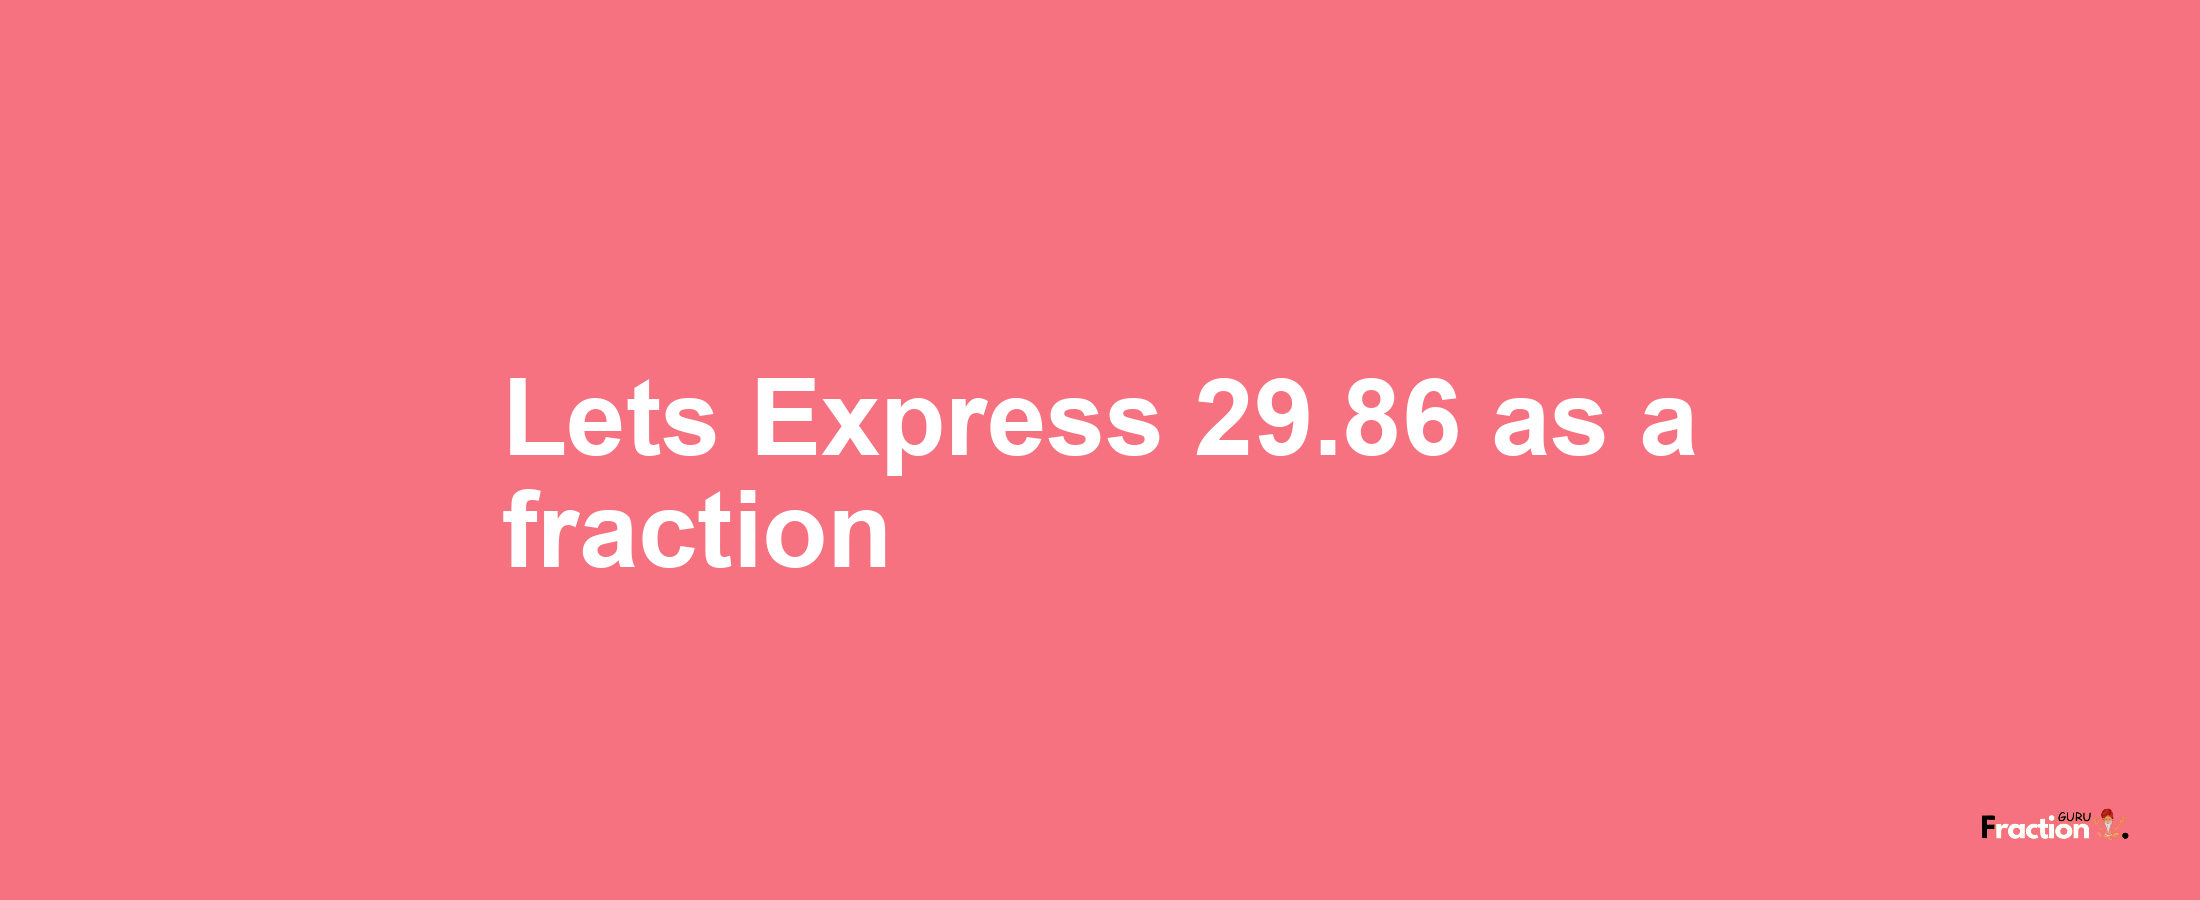 Lets Express 29.86 as afraction